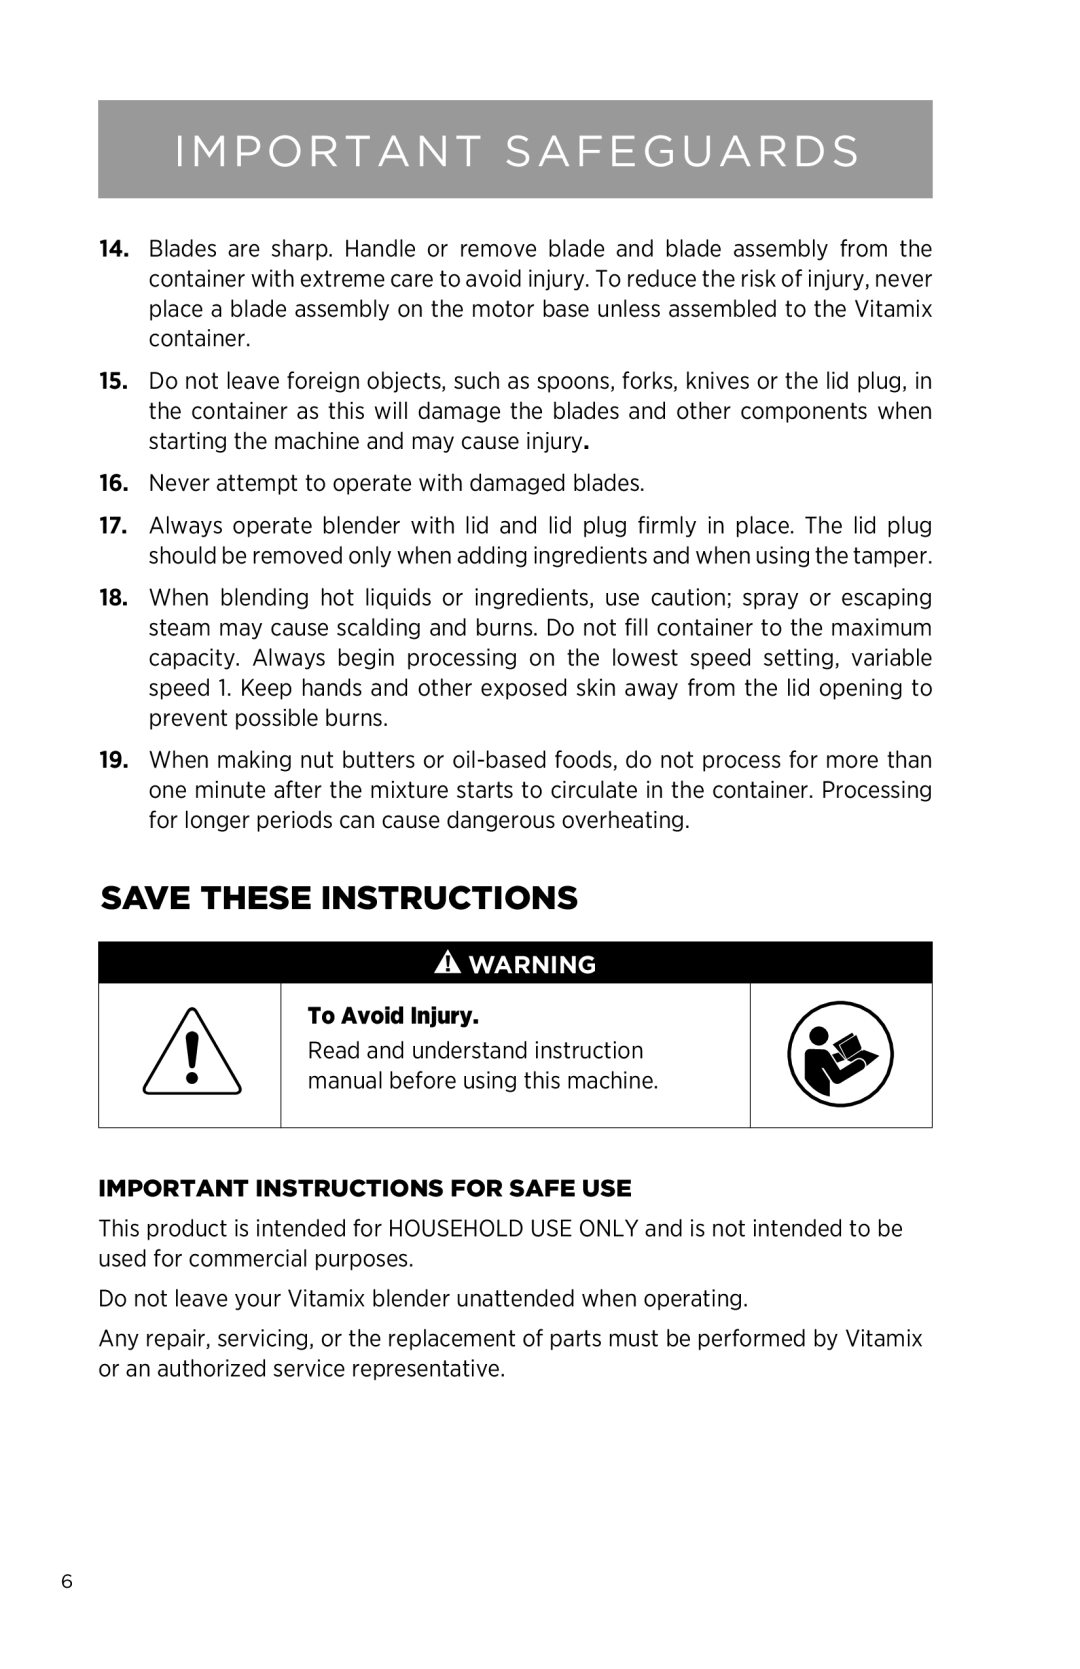 Vita-Mix NA To Avoid Injury, Important Instructions For Safe Use, Important Safeguards, Save These Instructions 